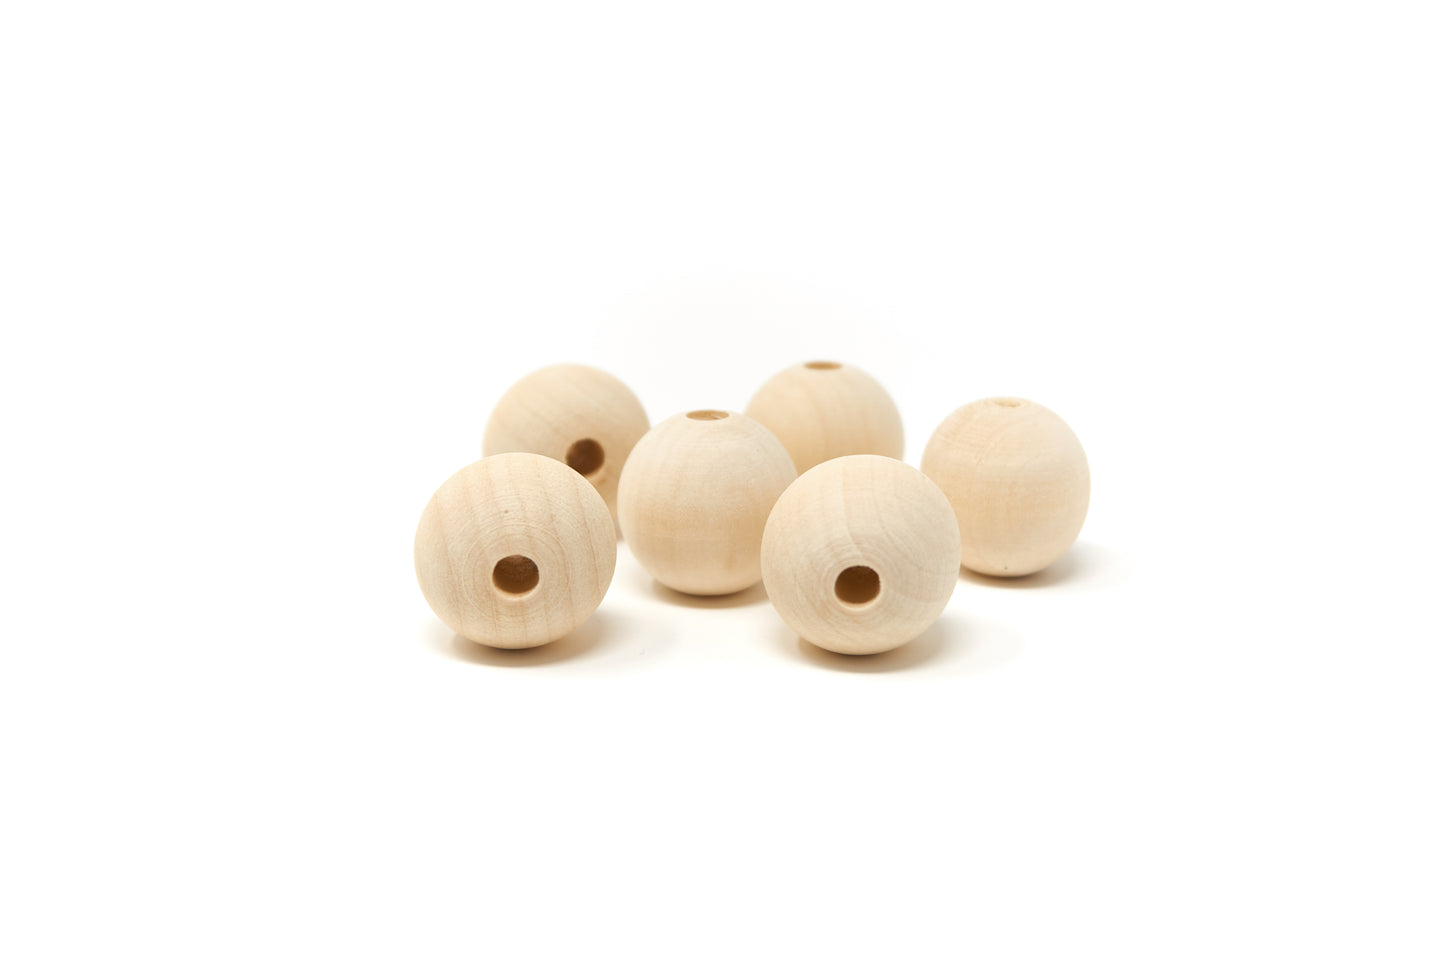 Natural Round Wood Beads 18mm 20 pieces - Cameos Art Shop